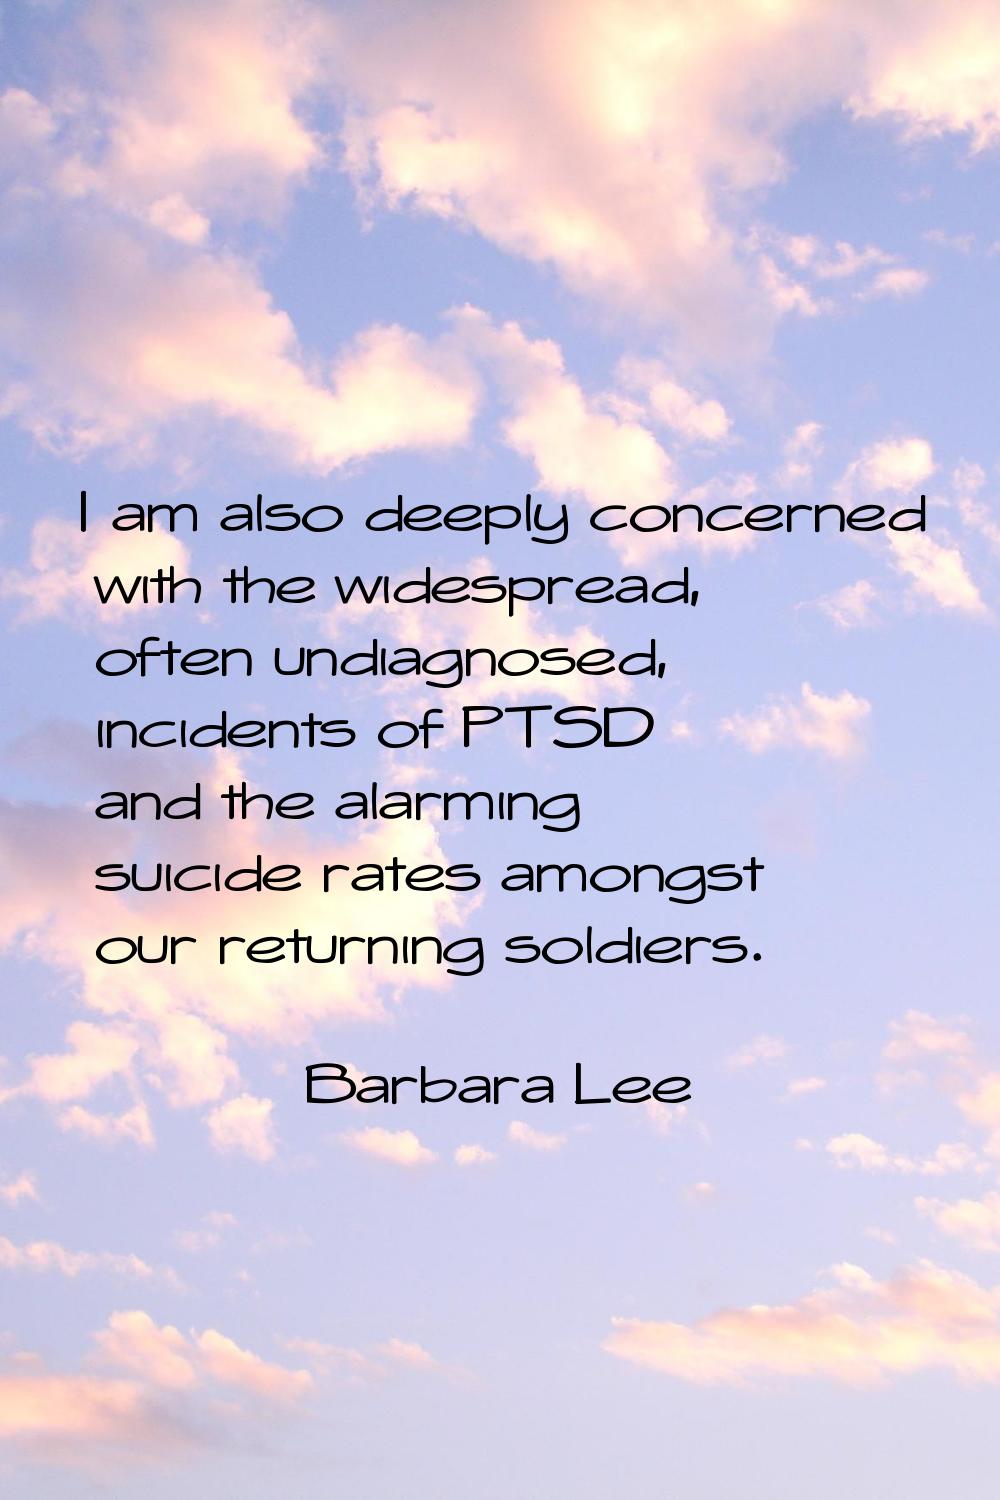 I am also deeply concerned with the widespread, often undiagnosed, incidents of PTSD and the alarmi